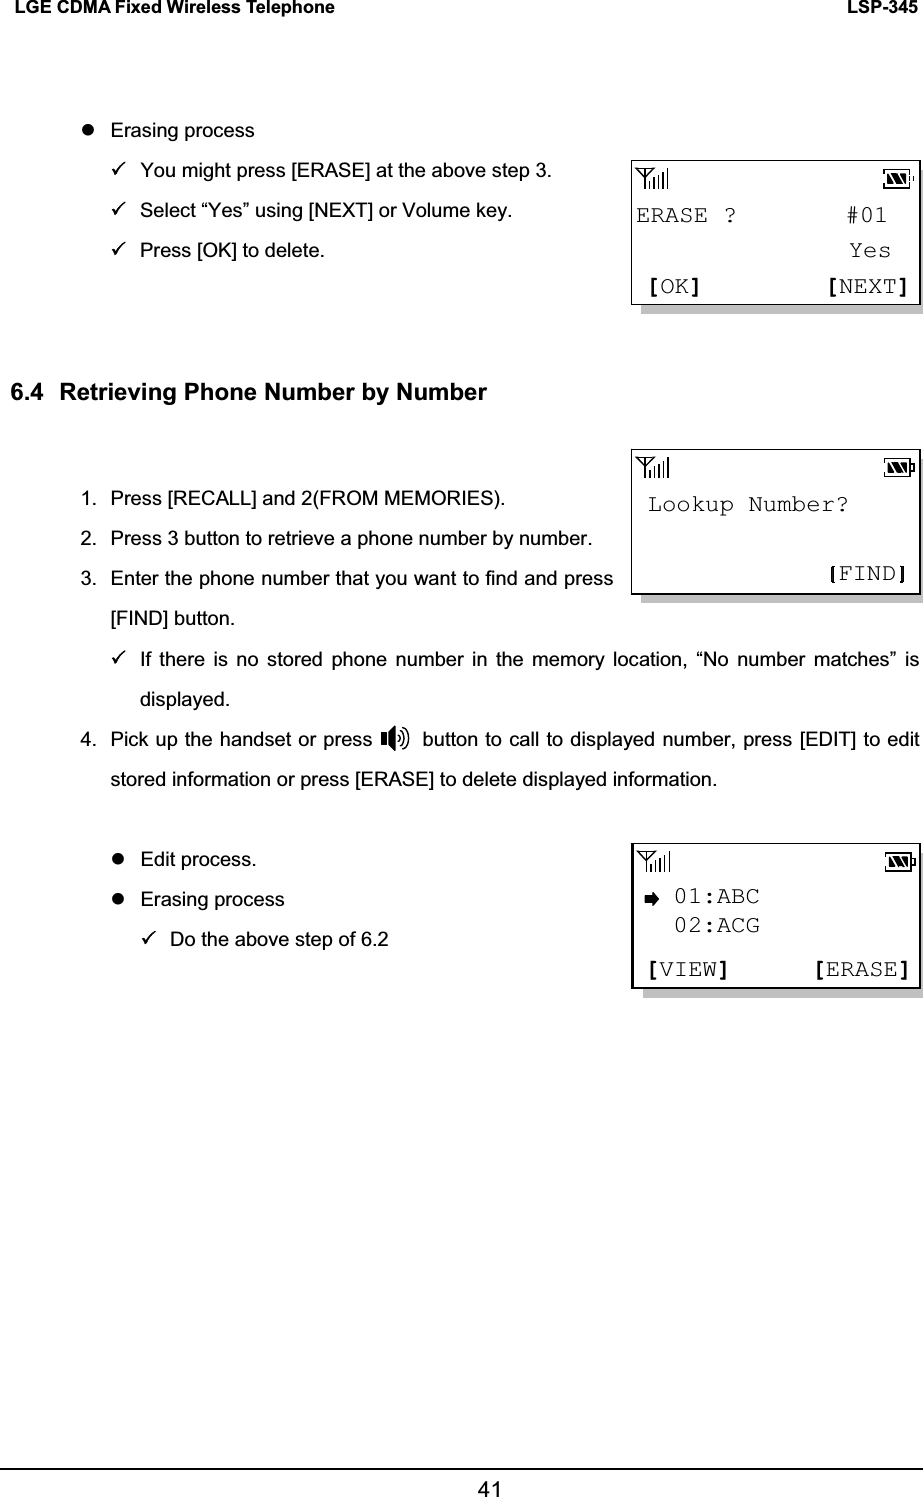 LSP-345LGE CDMA Fixed Wireless Telephone 41z Erasing process 3You might press [ERASE] at the above step 3.   3Select “Yes” using [NEXT] or Volume key. 3Press [OK] to delete. 6.4  Retrieving Phone Number by Number 1.  Press [RECALL] and 2(FROM MEMORIES). 2.  Press 3 button to retrieve a phone number by number. 3.  Enter the phone number that you want to find and press [FIND] button. 3If there is no stored phone number in the memory location, “No number matches” is displayed. 4.  Pick up the handset or press          button to call to displayed number, press [EDIT] to edit stored information or press [ERASE] to delete displayed information.   z Edit process. z Erasing process 3Do the above step of 6.2 Lookup Number?FIND01:ABC[ERASE][VIEW]02:ACGERASE ?         #01[NEXT][OK] Yes 